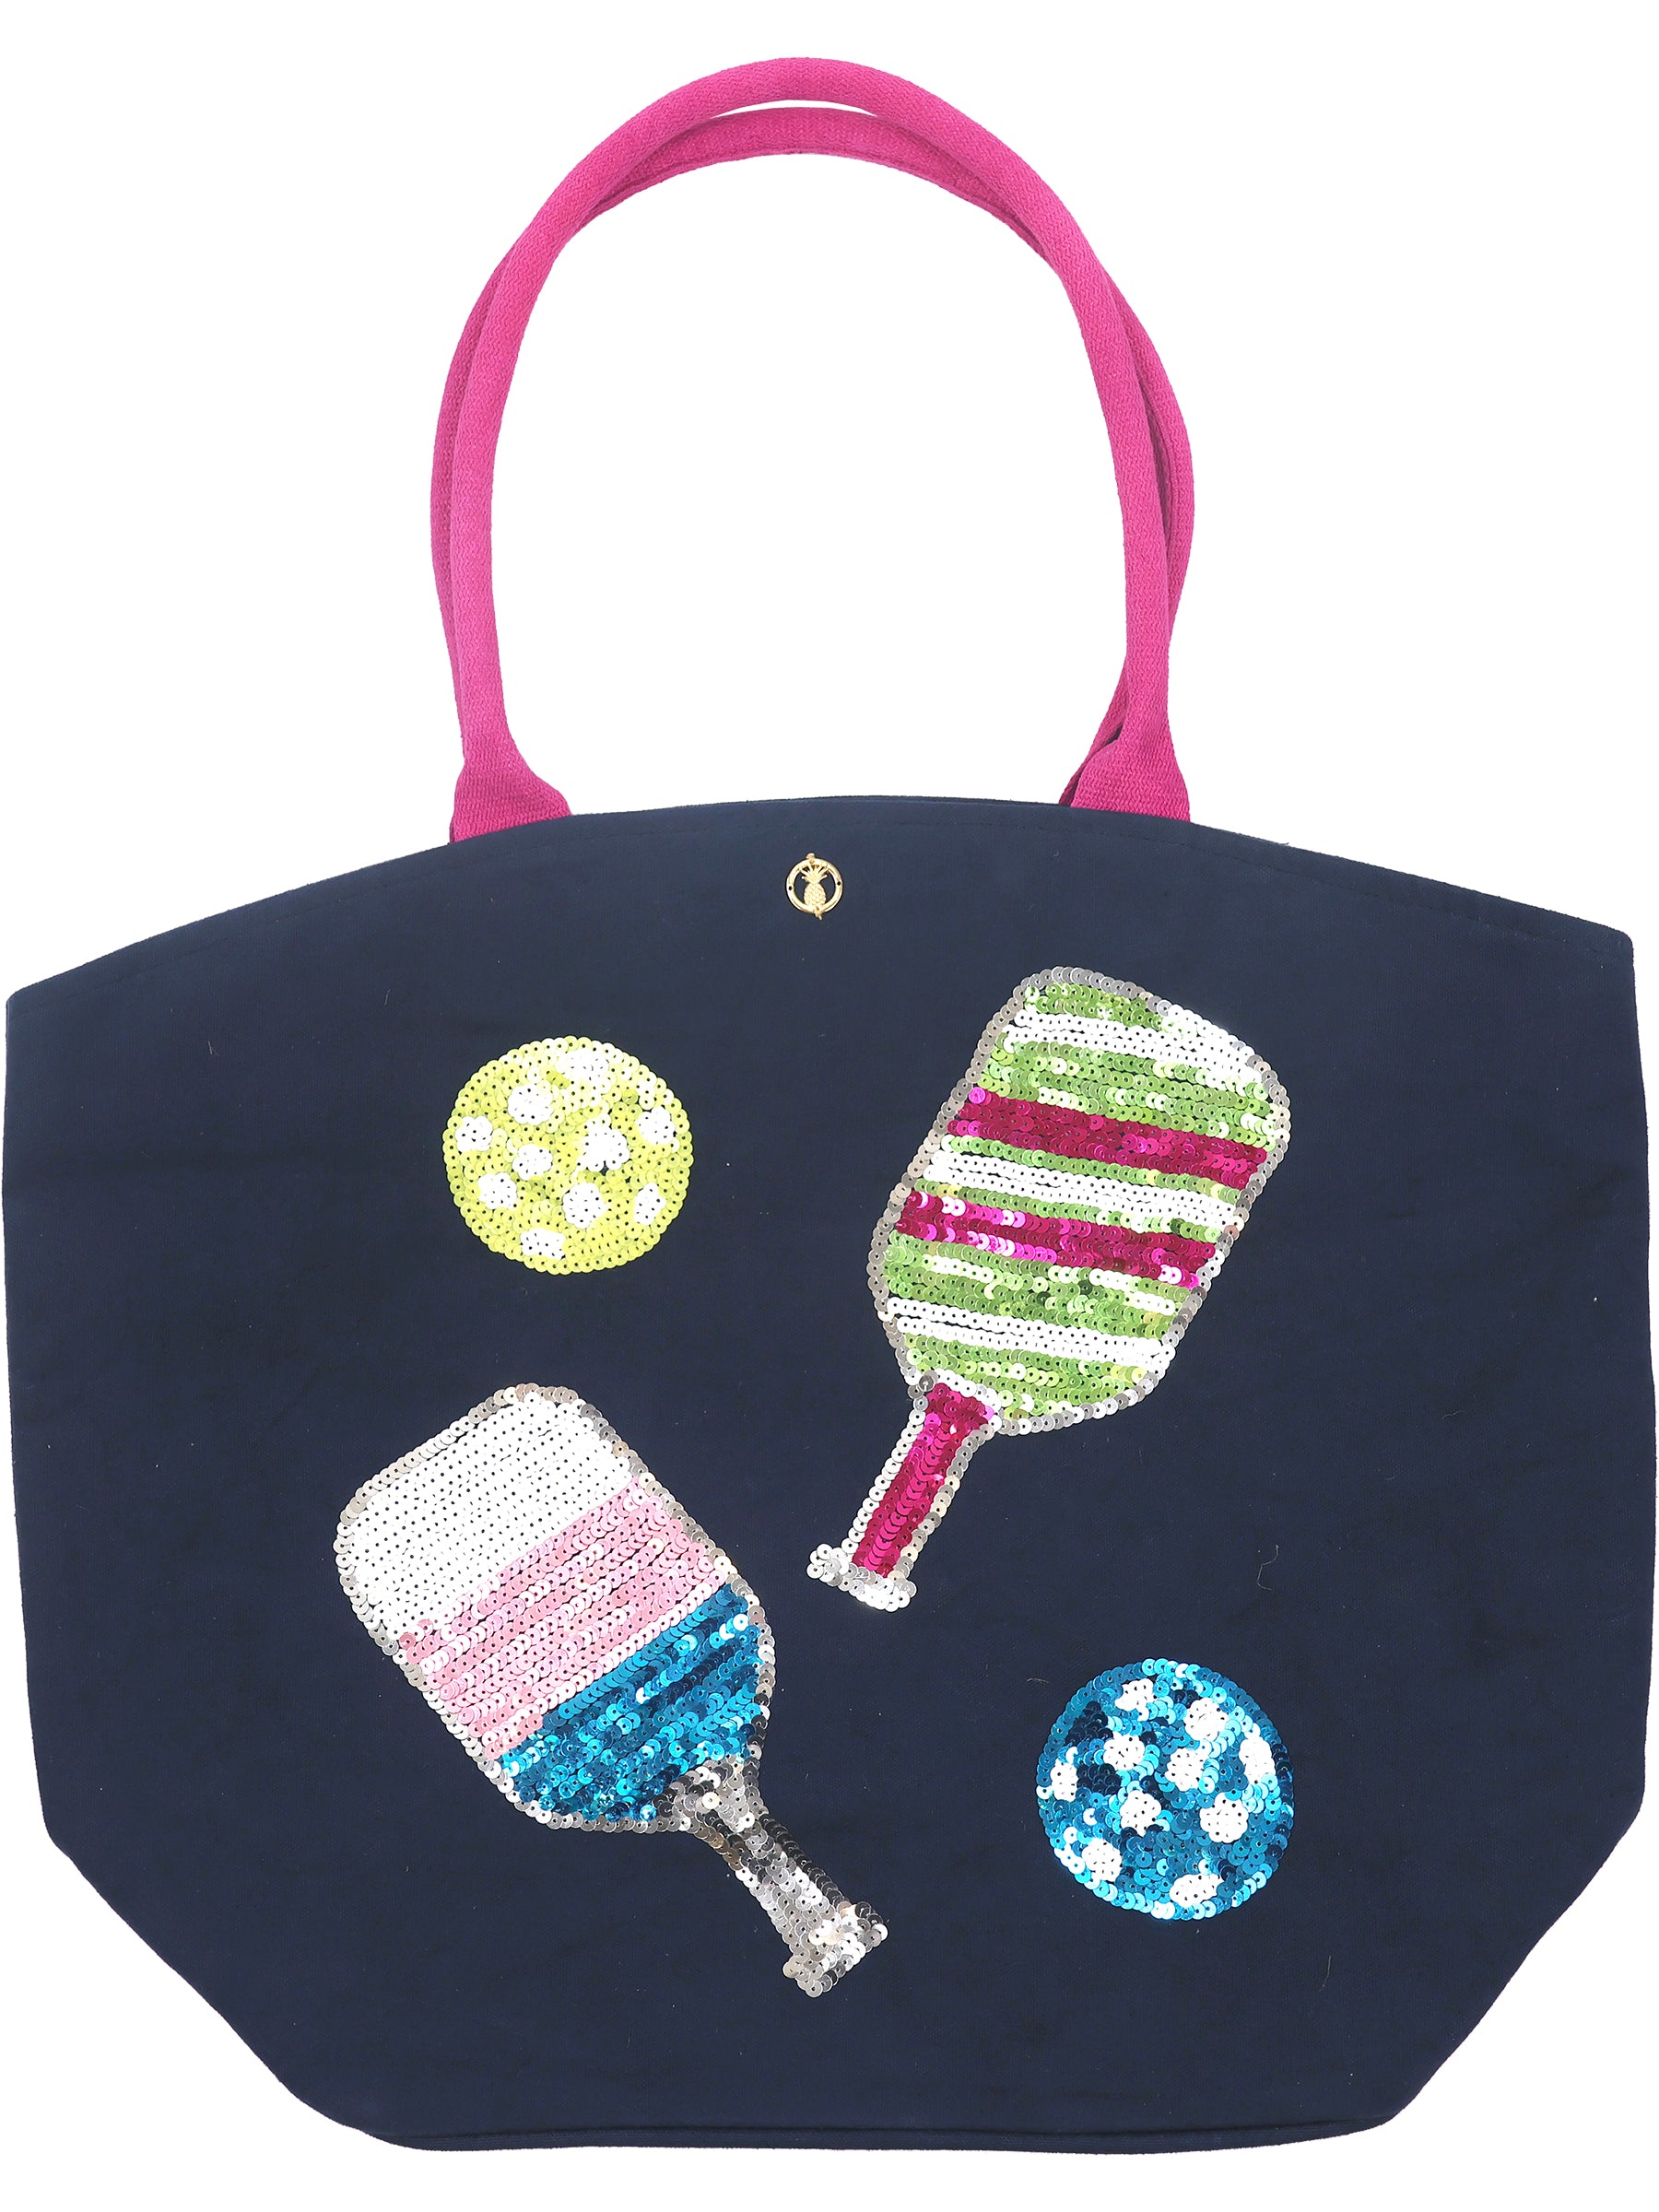 Embroidered Sequin Totes by Simply Southern